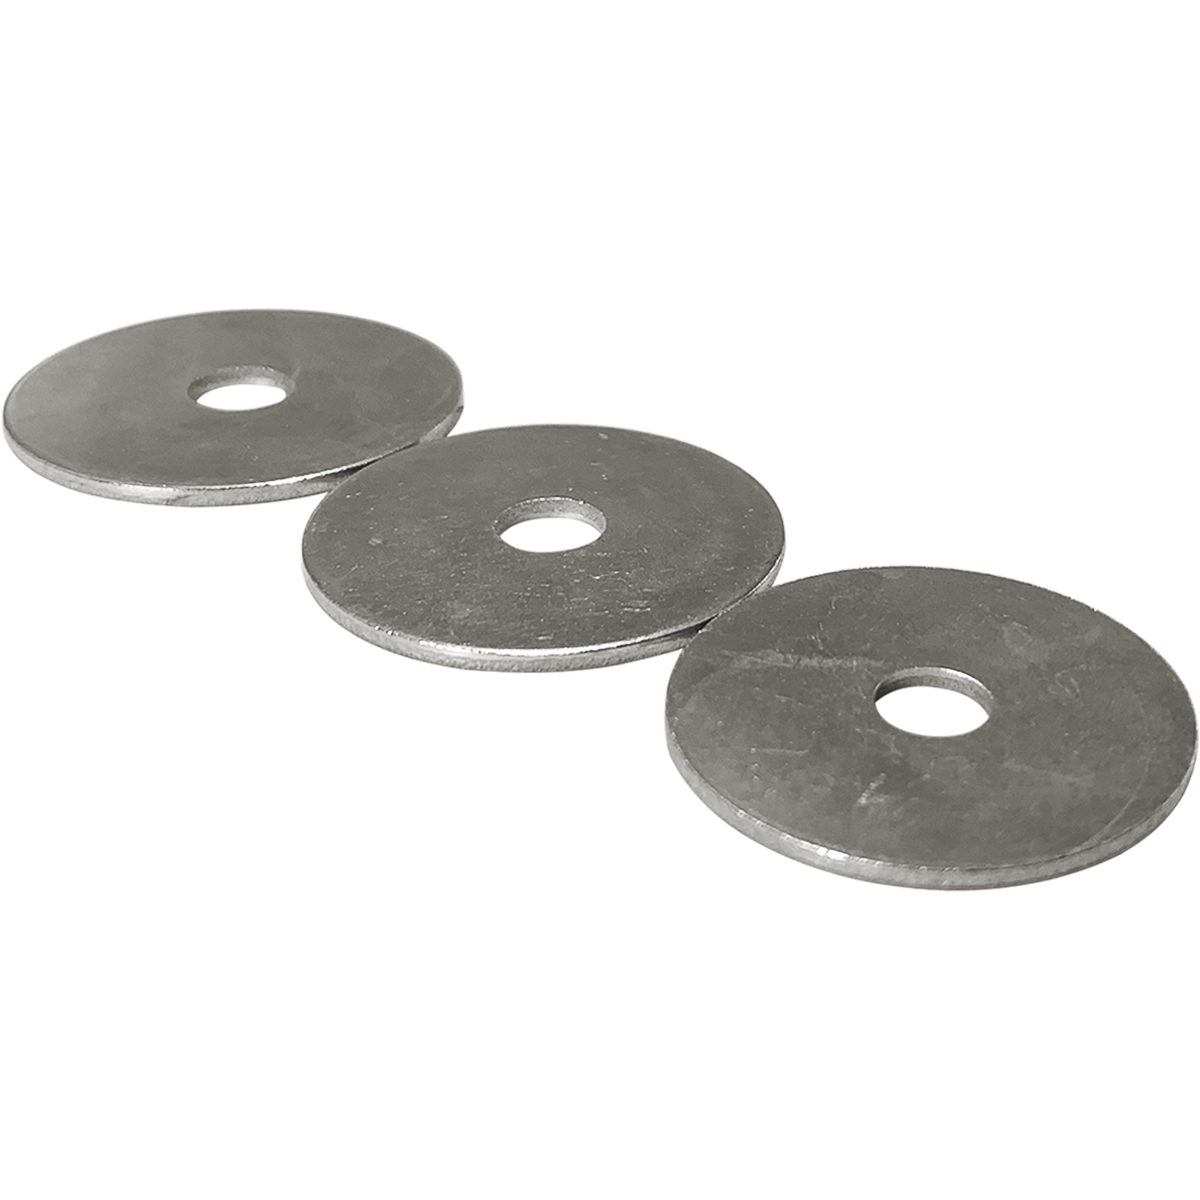 Penny washers - Also known as repair or mudguard washers - available in a variety of sizes, all at competitive prices.